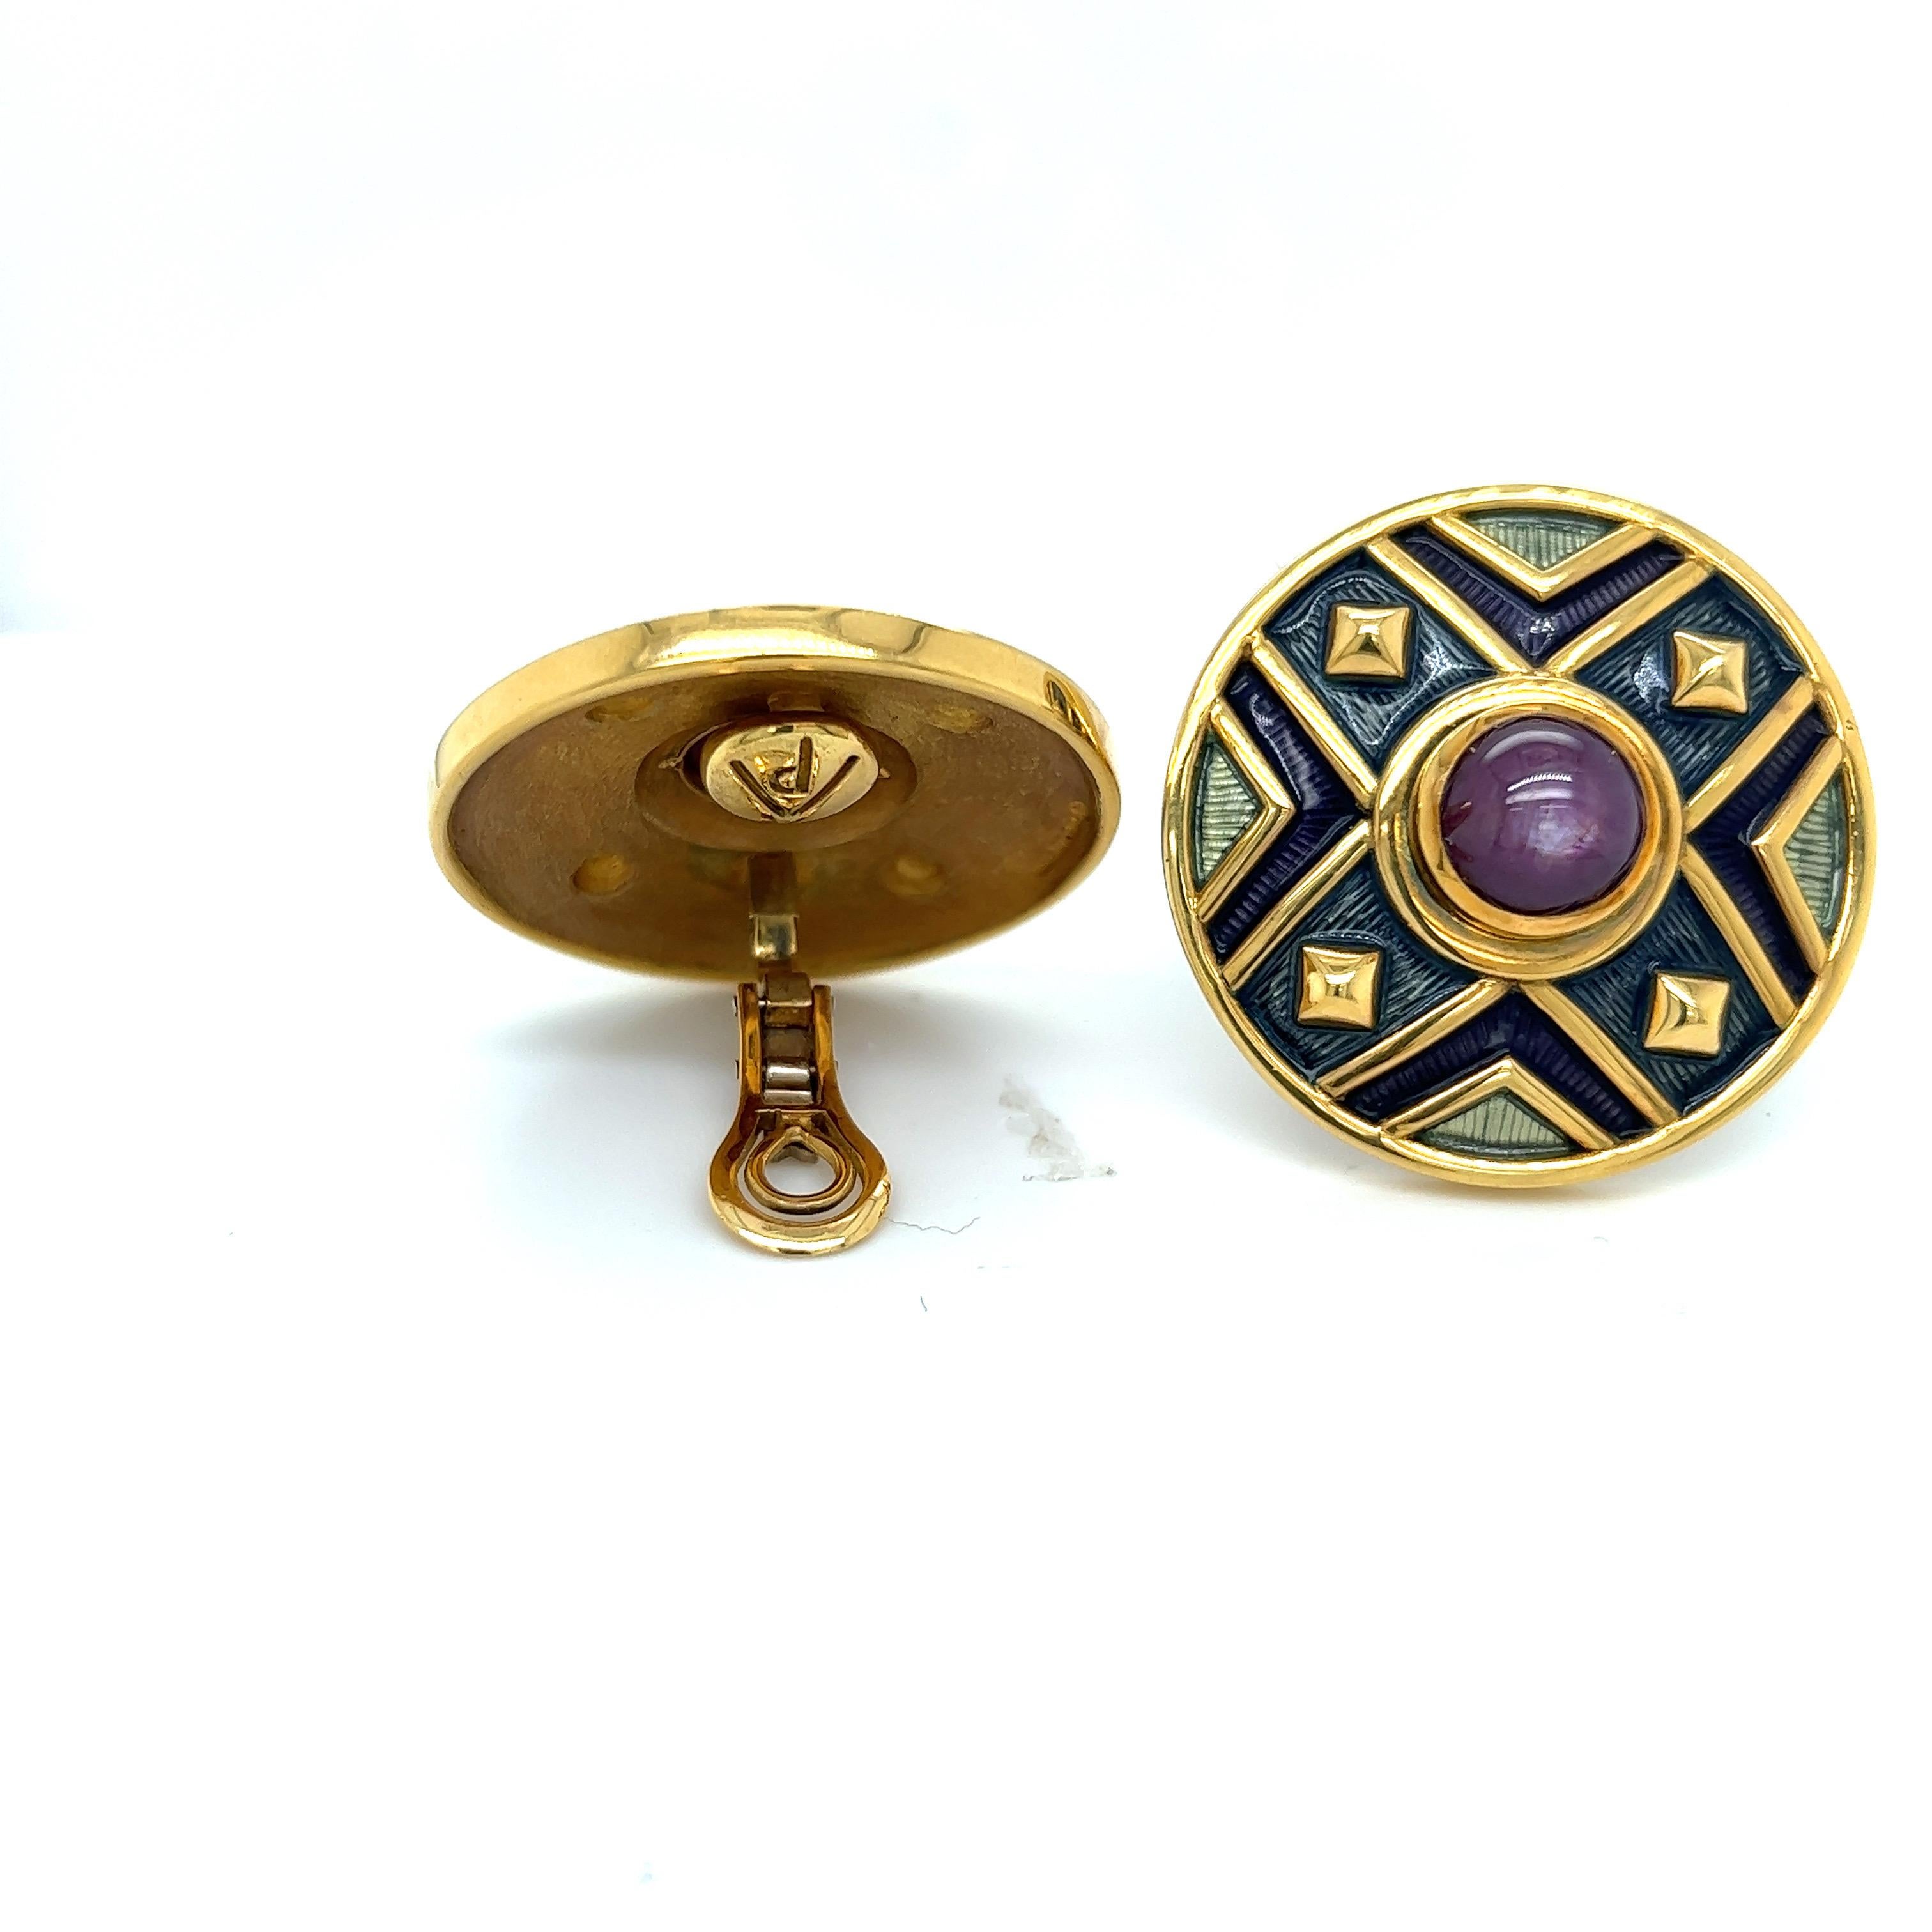 These 18 karat yellow gold earrings are the perfect example of de Vroomens iconic style. The large cabochon star ruby centers are offset with beautiful guilloche enamel in a neutral grey , green and purple color, along with yellow gold details. They